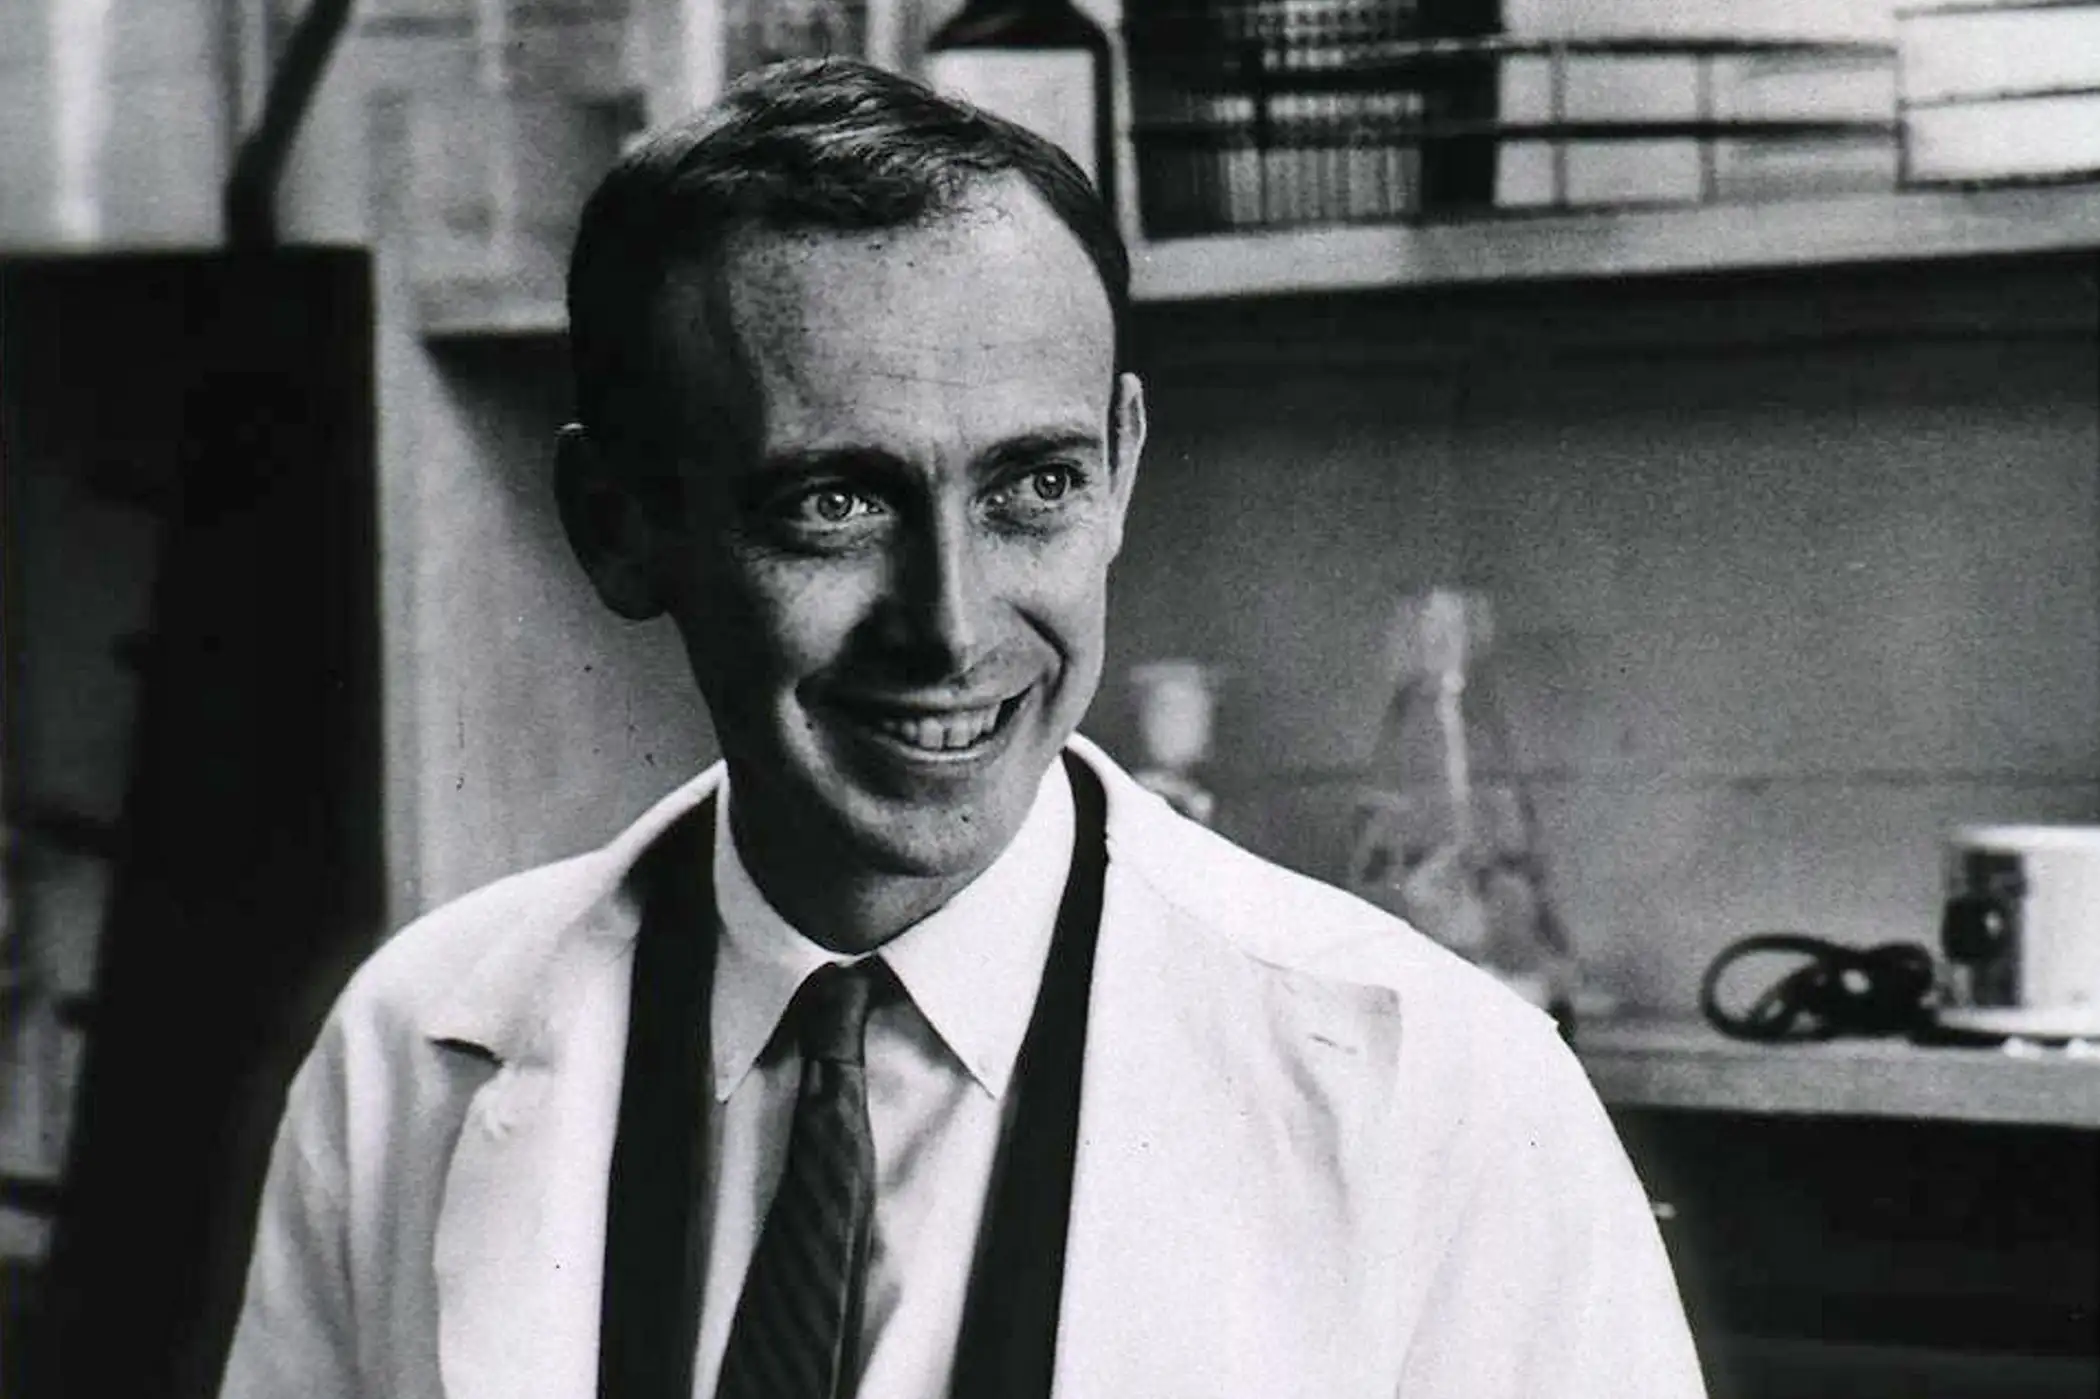 Photograph of James Watson (1928-) an American molecular biologist, geneticist and zoologist, best known as one of the co-discoverers of the structure of DNA in 1953 with Francis Crick, 1953.